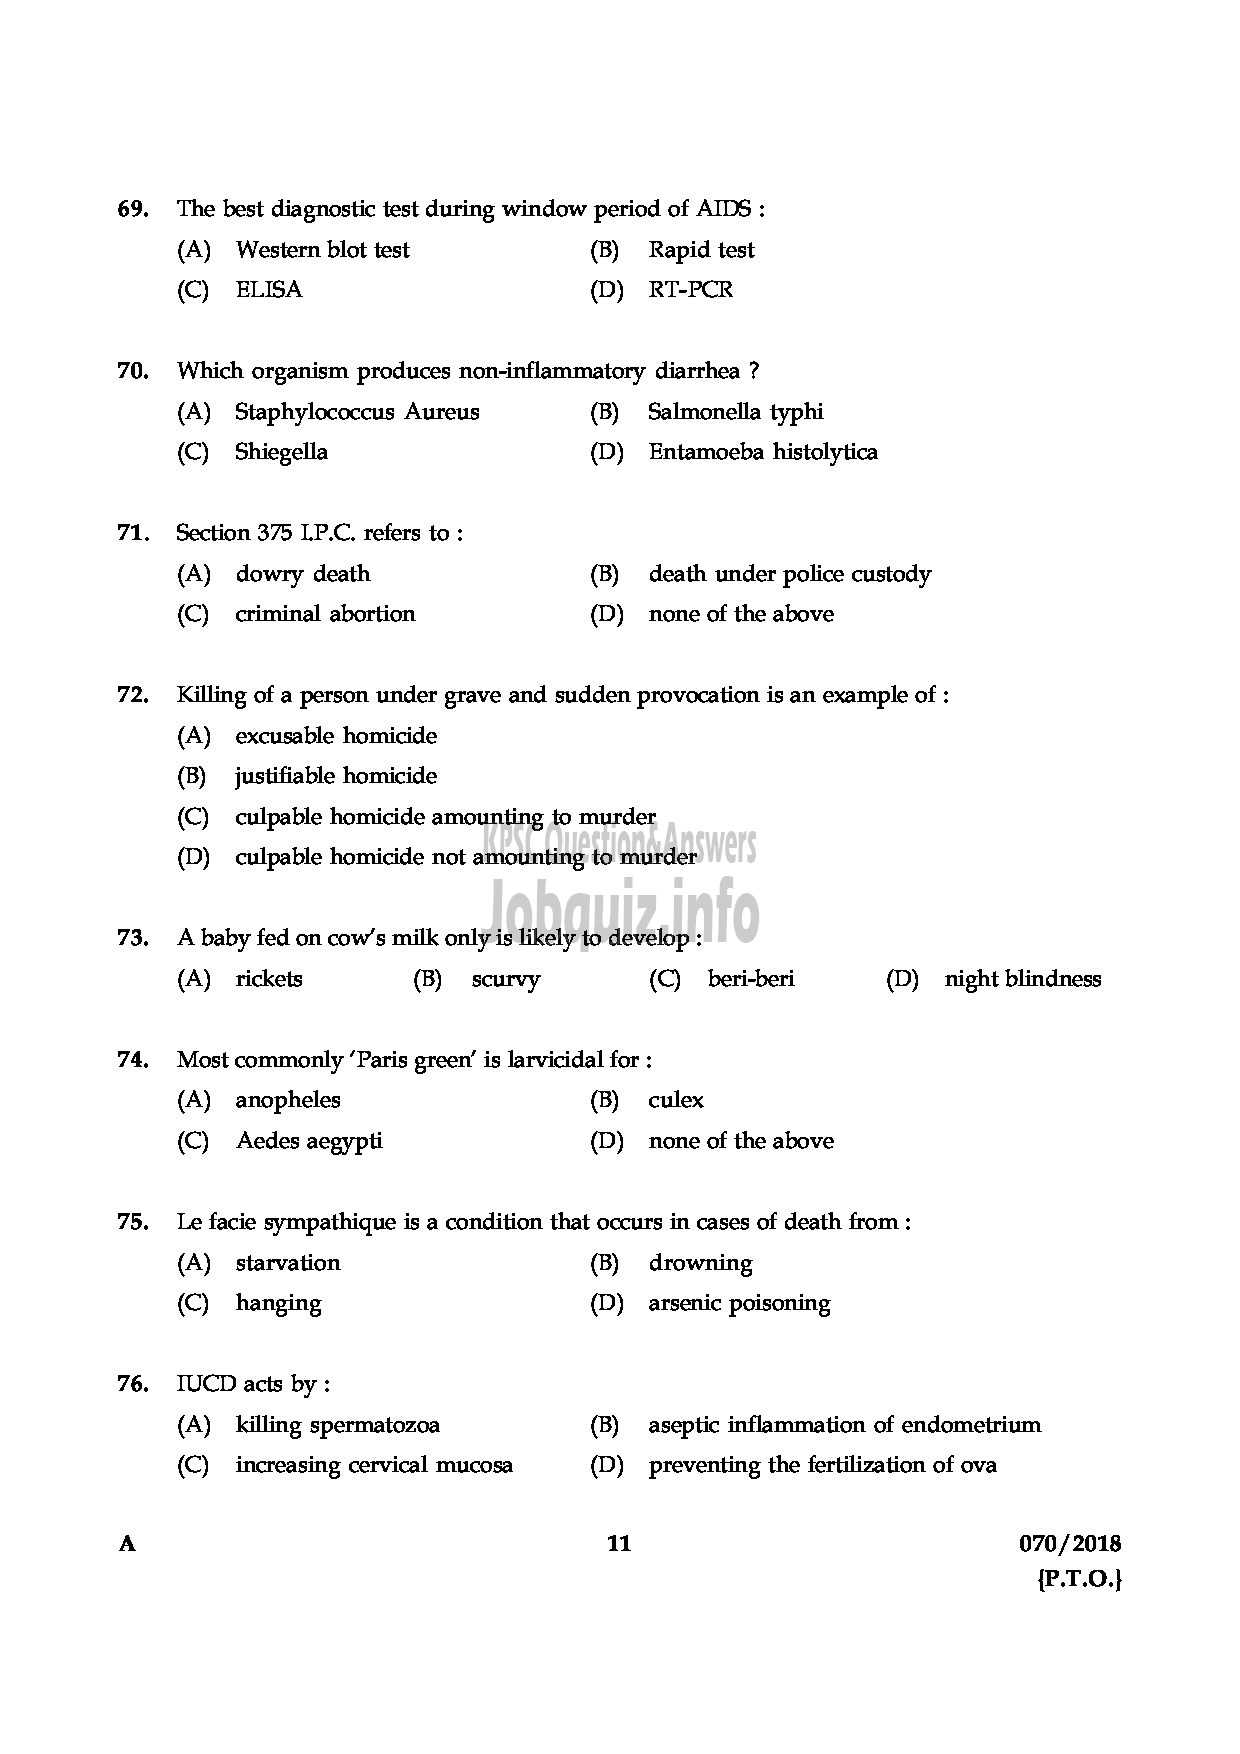 Kerala PSC Question Paper - MEDICAL OFFICER HOMOEO/ ASSISTANT INSURANCE MEDICAL OFFICER HOMOEO HOMOEOPATHY/ INSURANCE MEDICAL SERVICES-11